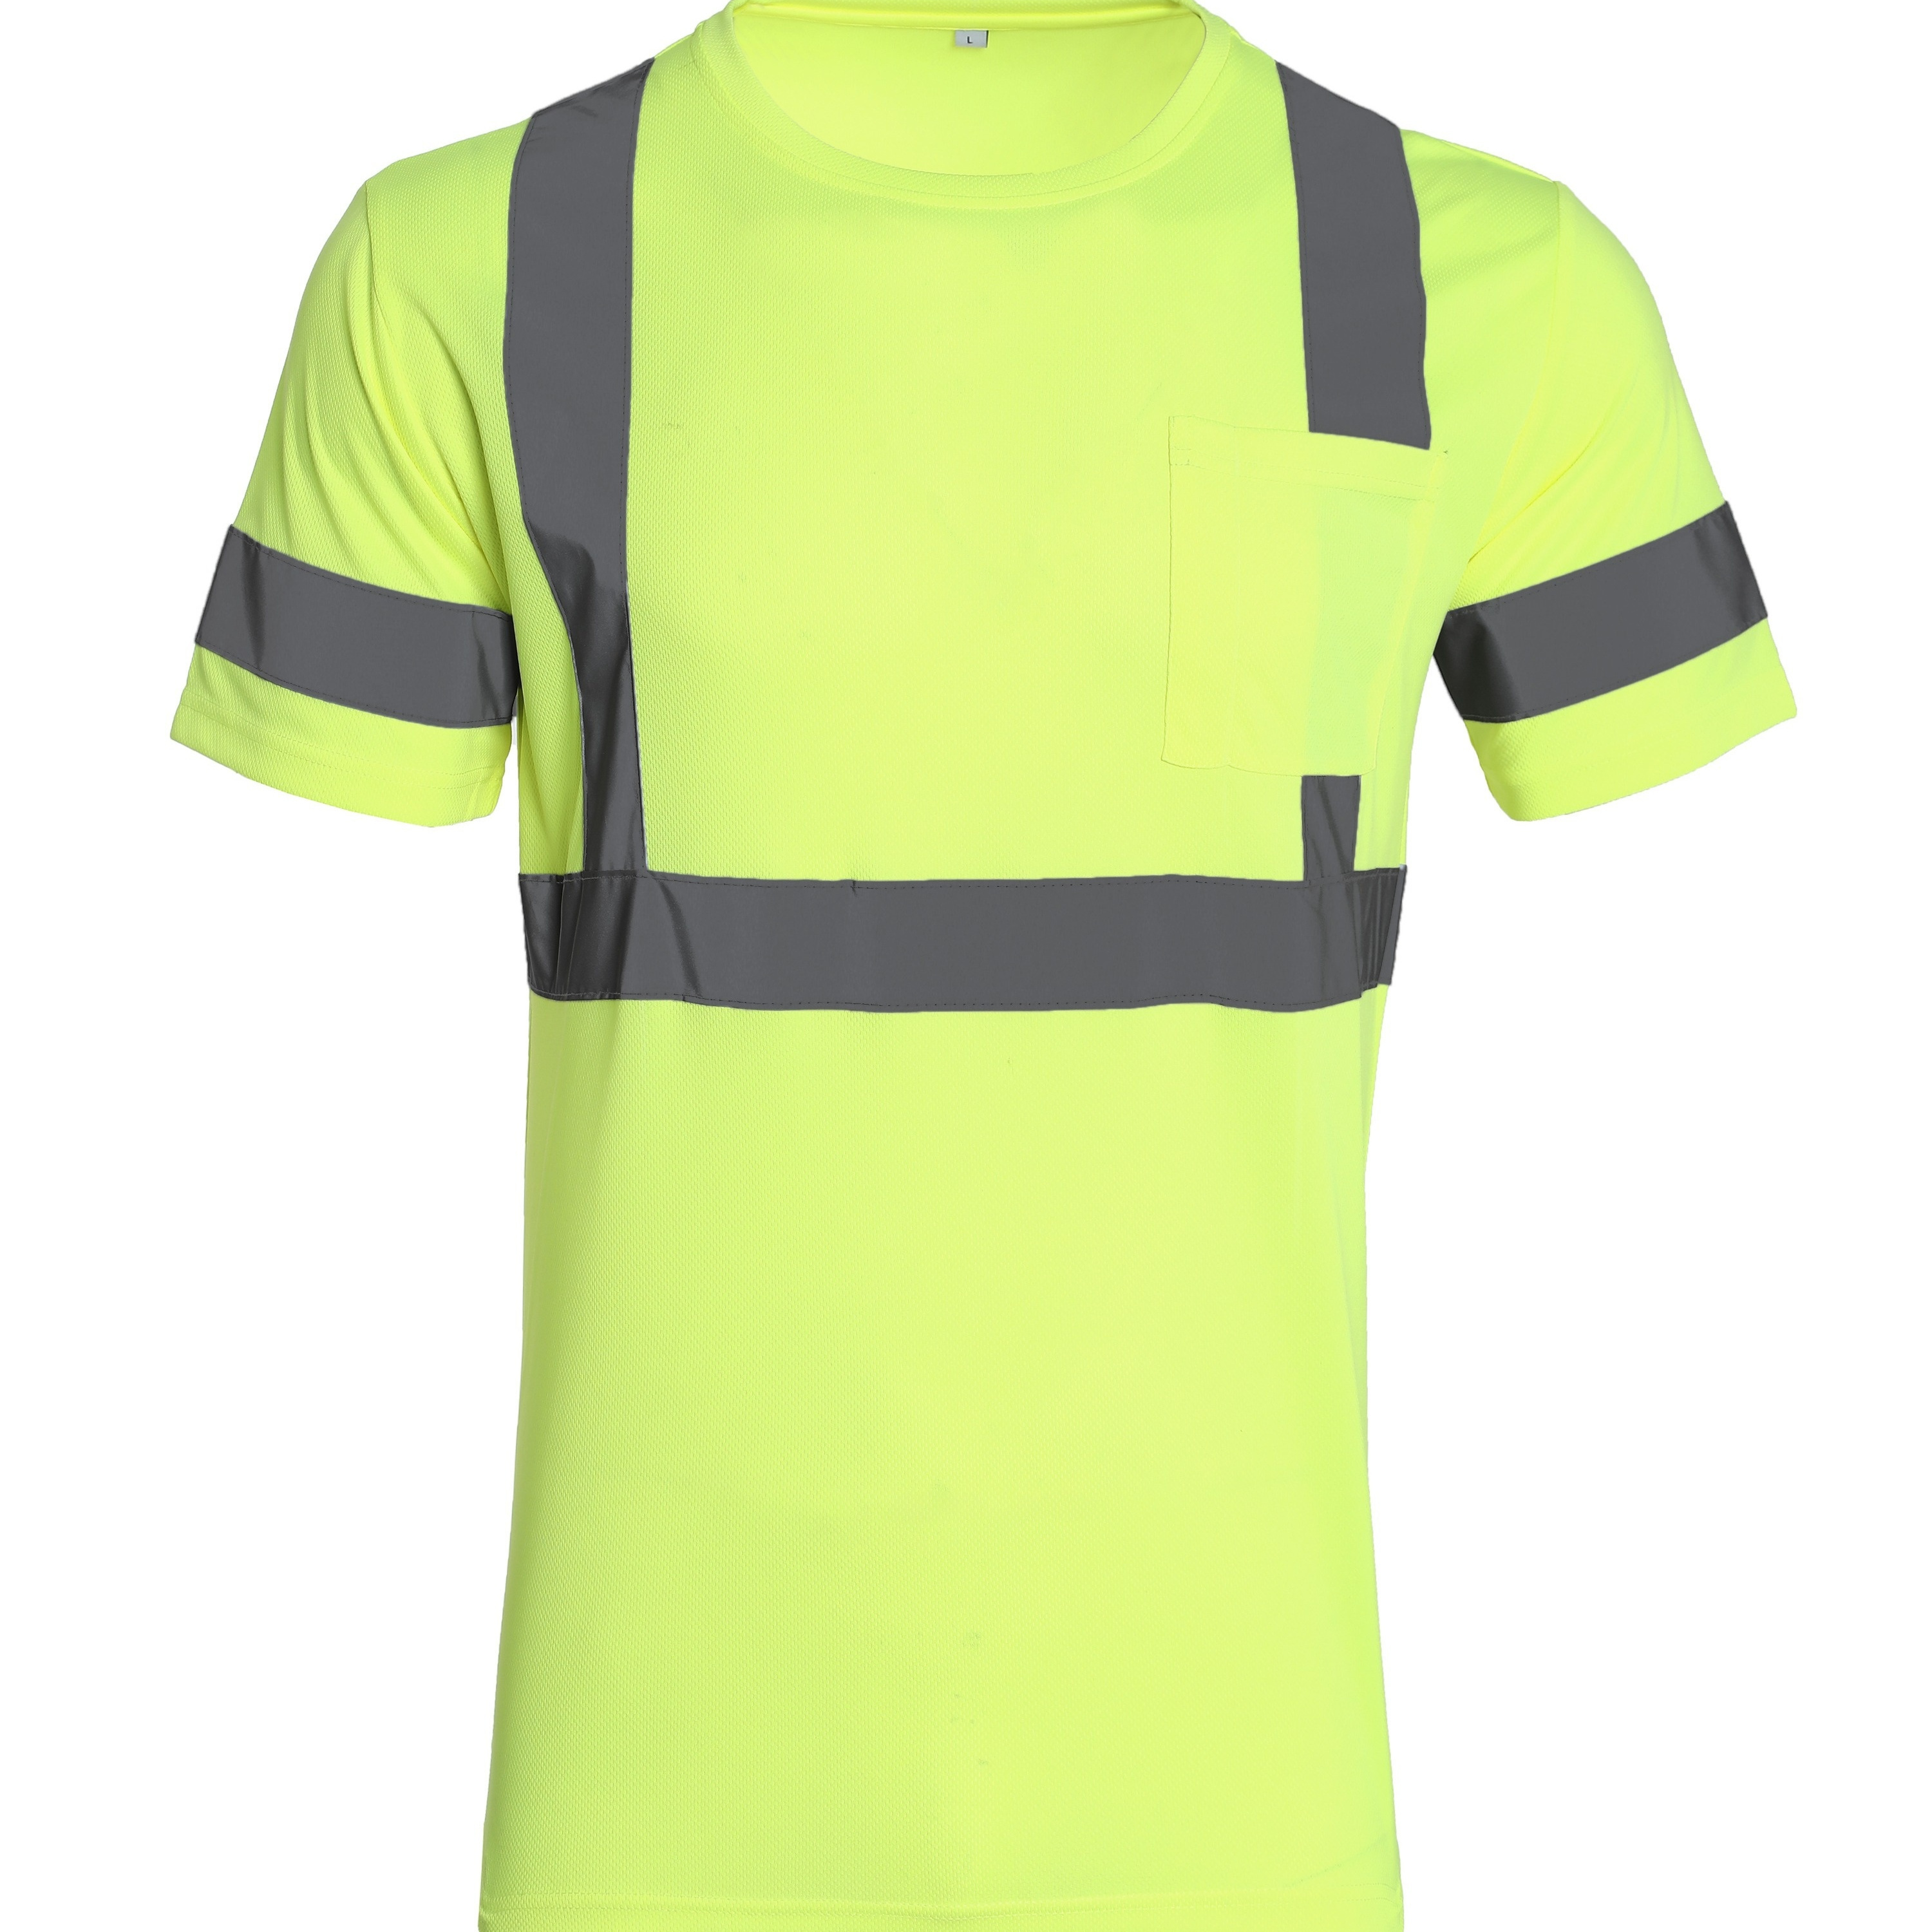 

Men's Breathable Short Sleeve Visual Reflective Safety T-shirt, Stay Safe Visible Reflective Shirt, Electrical Machine Dress Up Protection Workwear